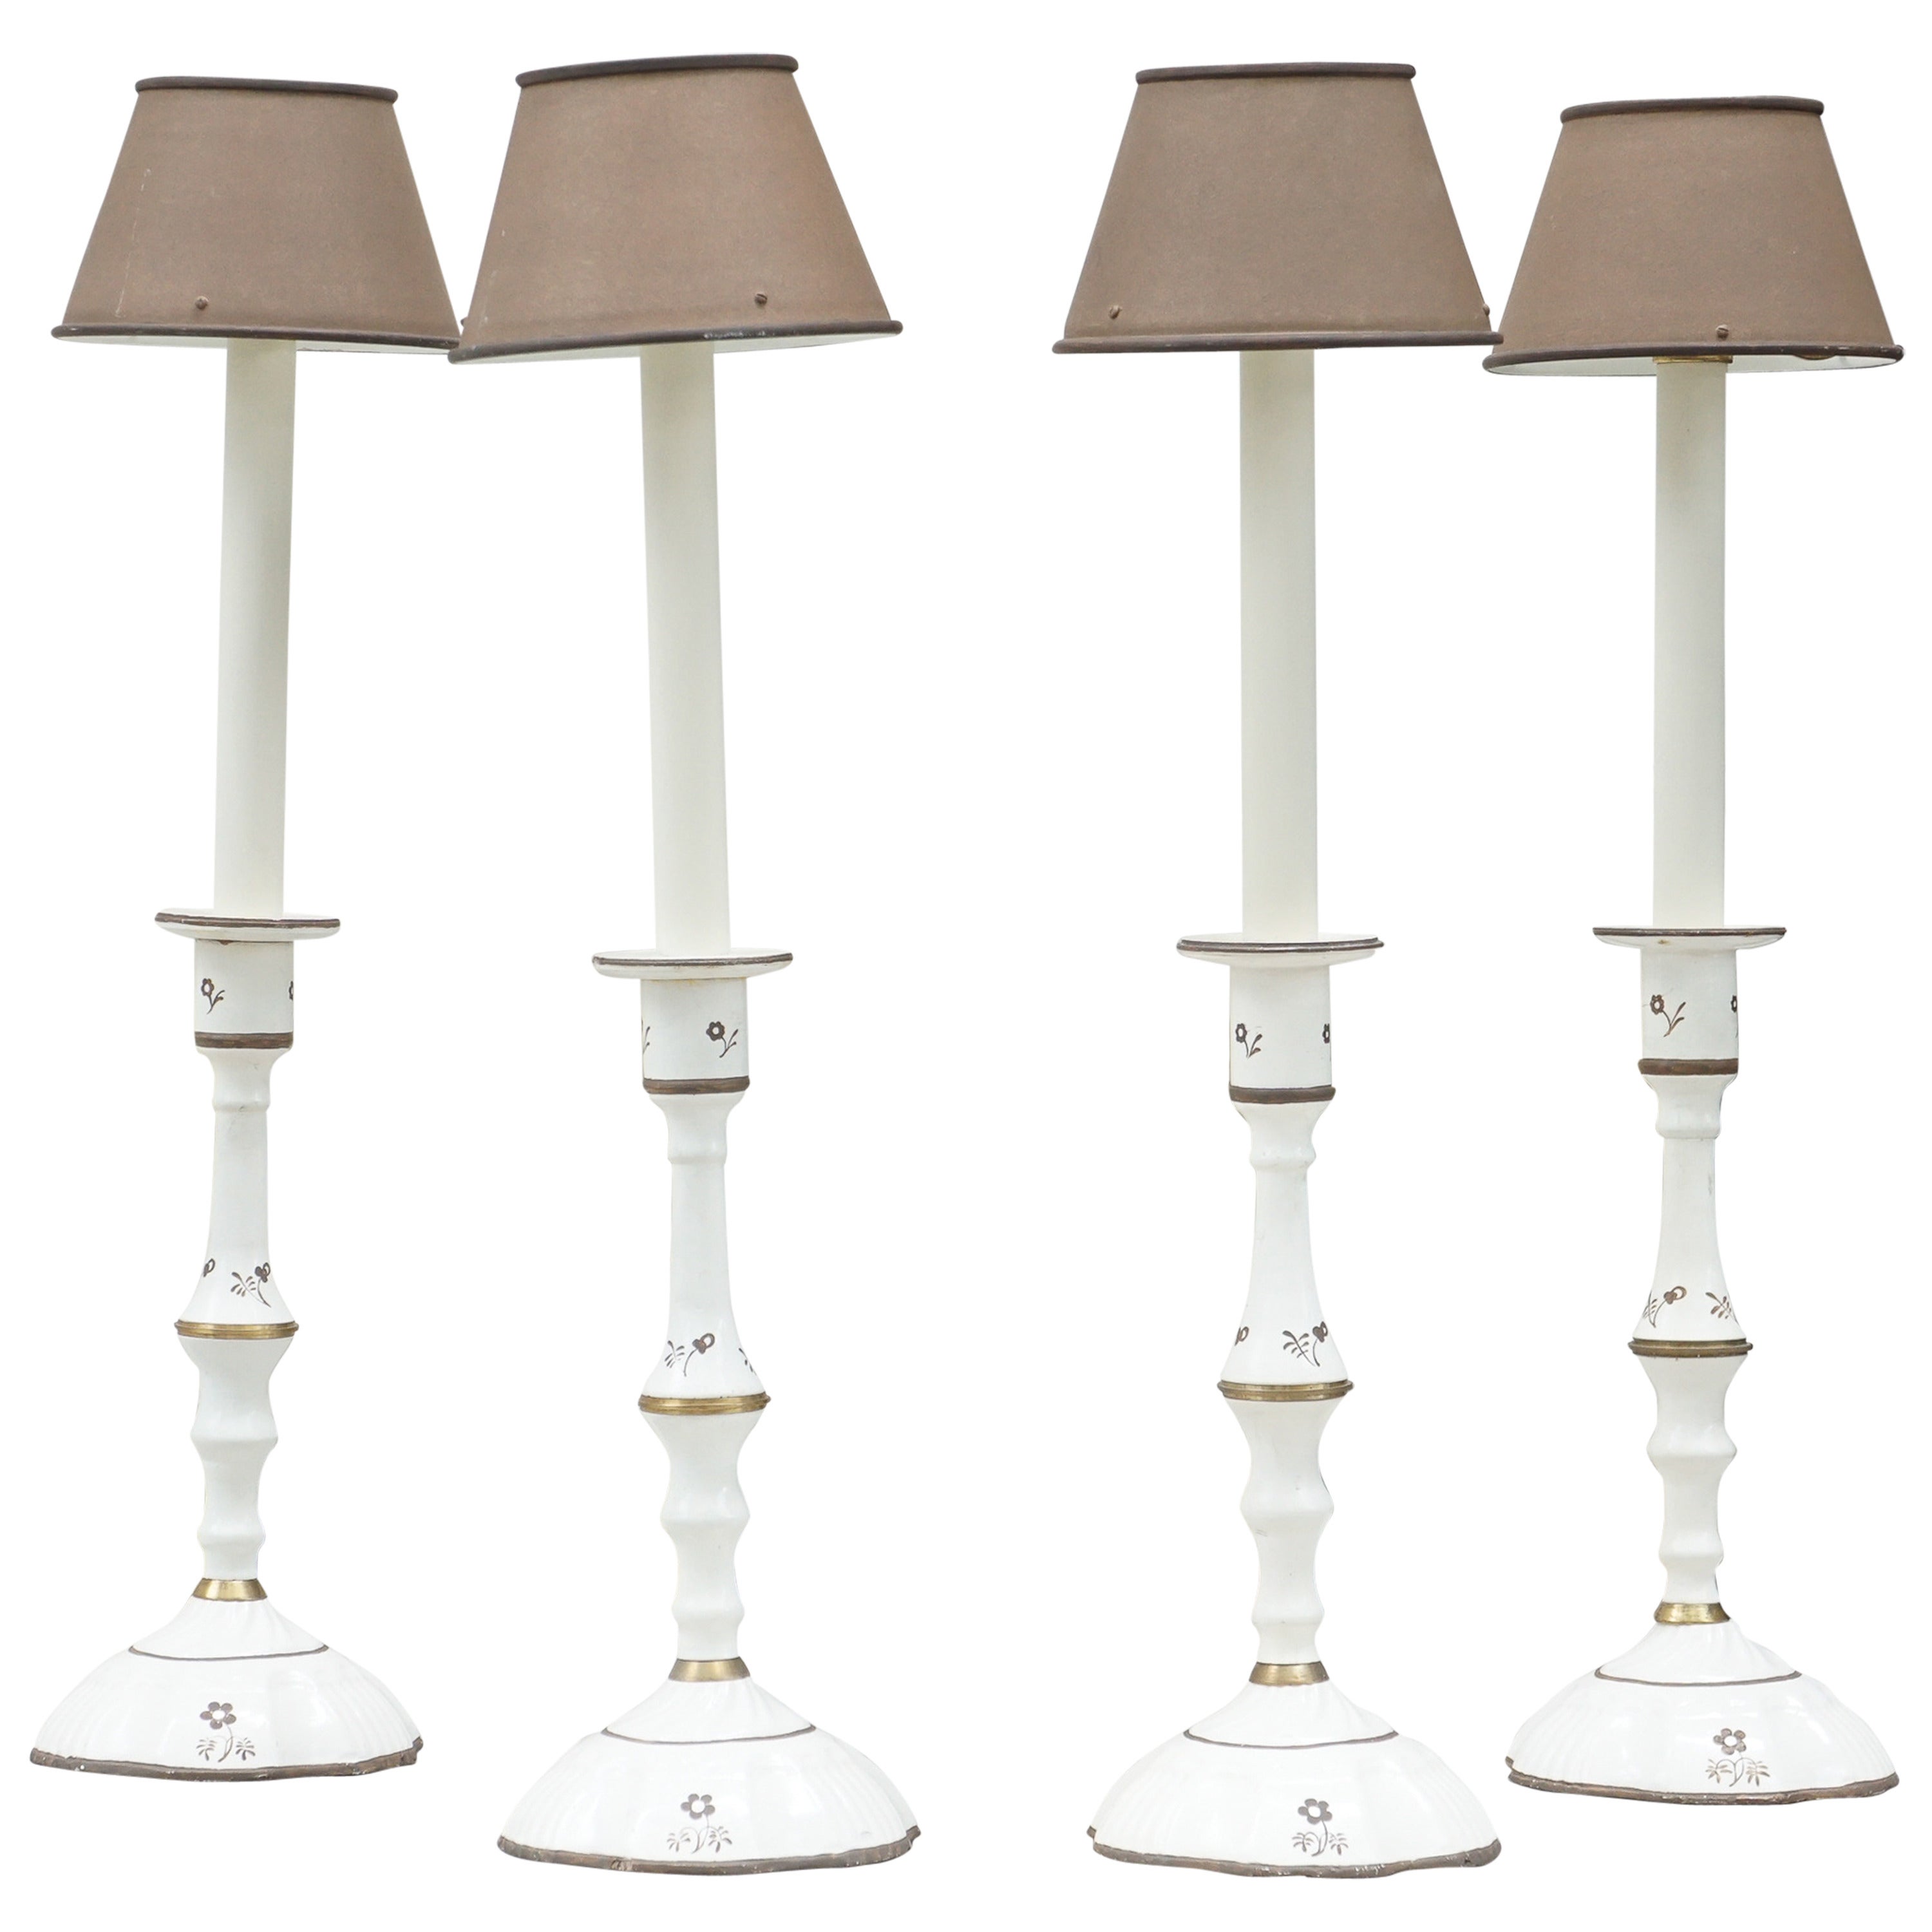 Four Decorative Candlesticks with Tole Shades from the Estate of Bunny Mellon